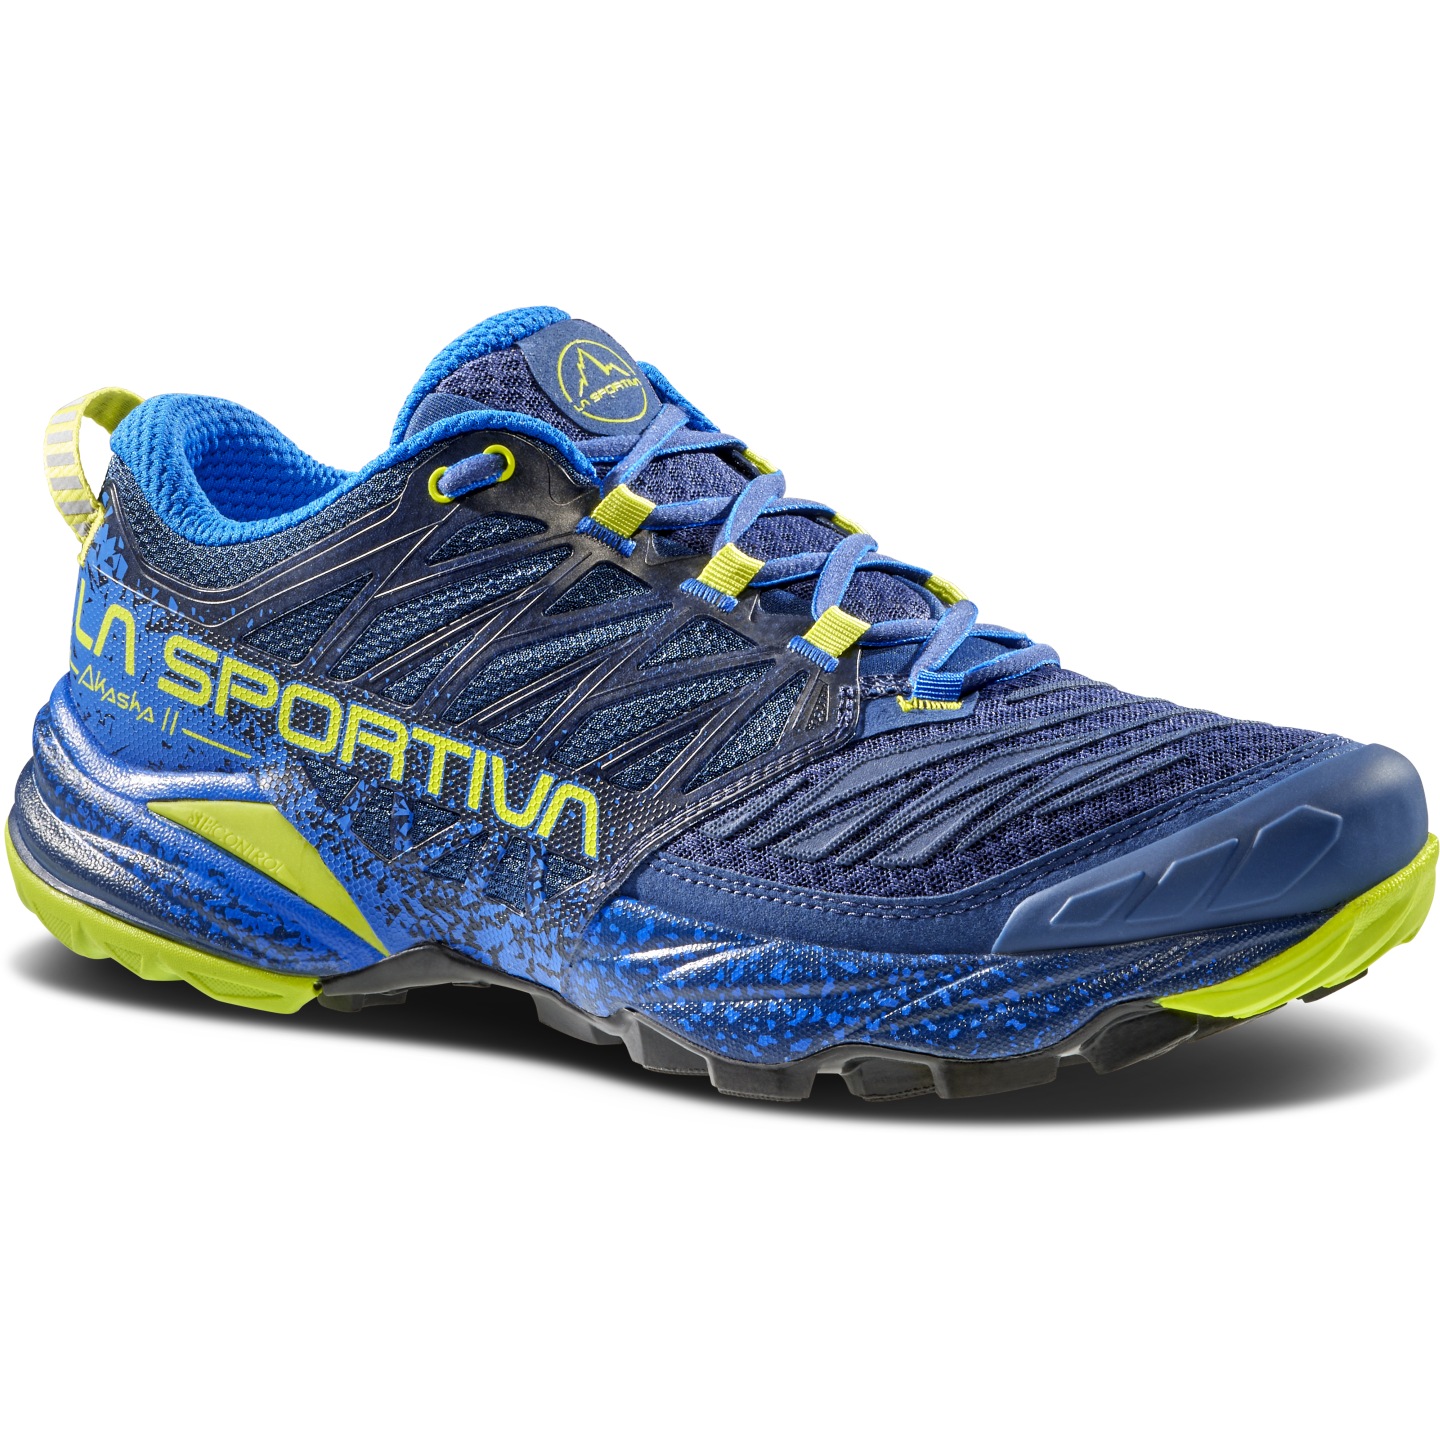 Picture of La Sportiva Akasha II Running Shoes Men - Storm Blue/Lime Punch